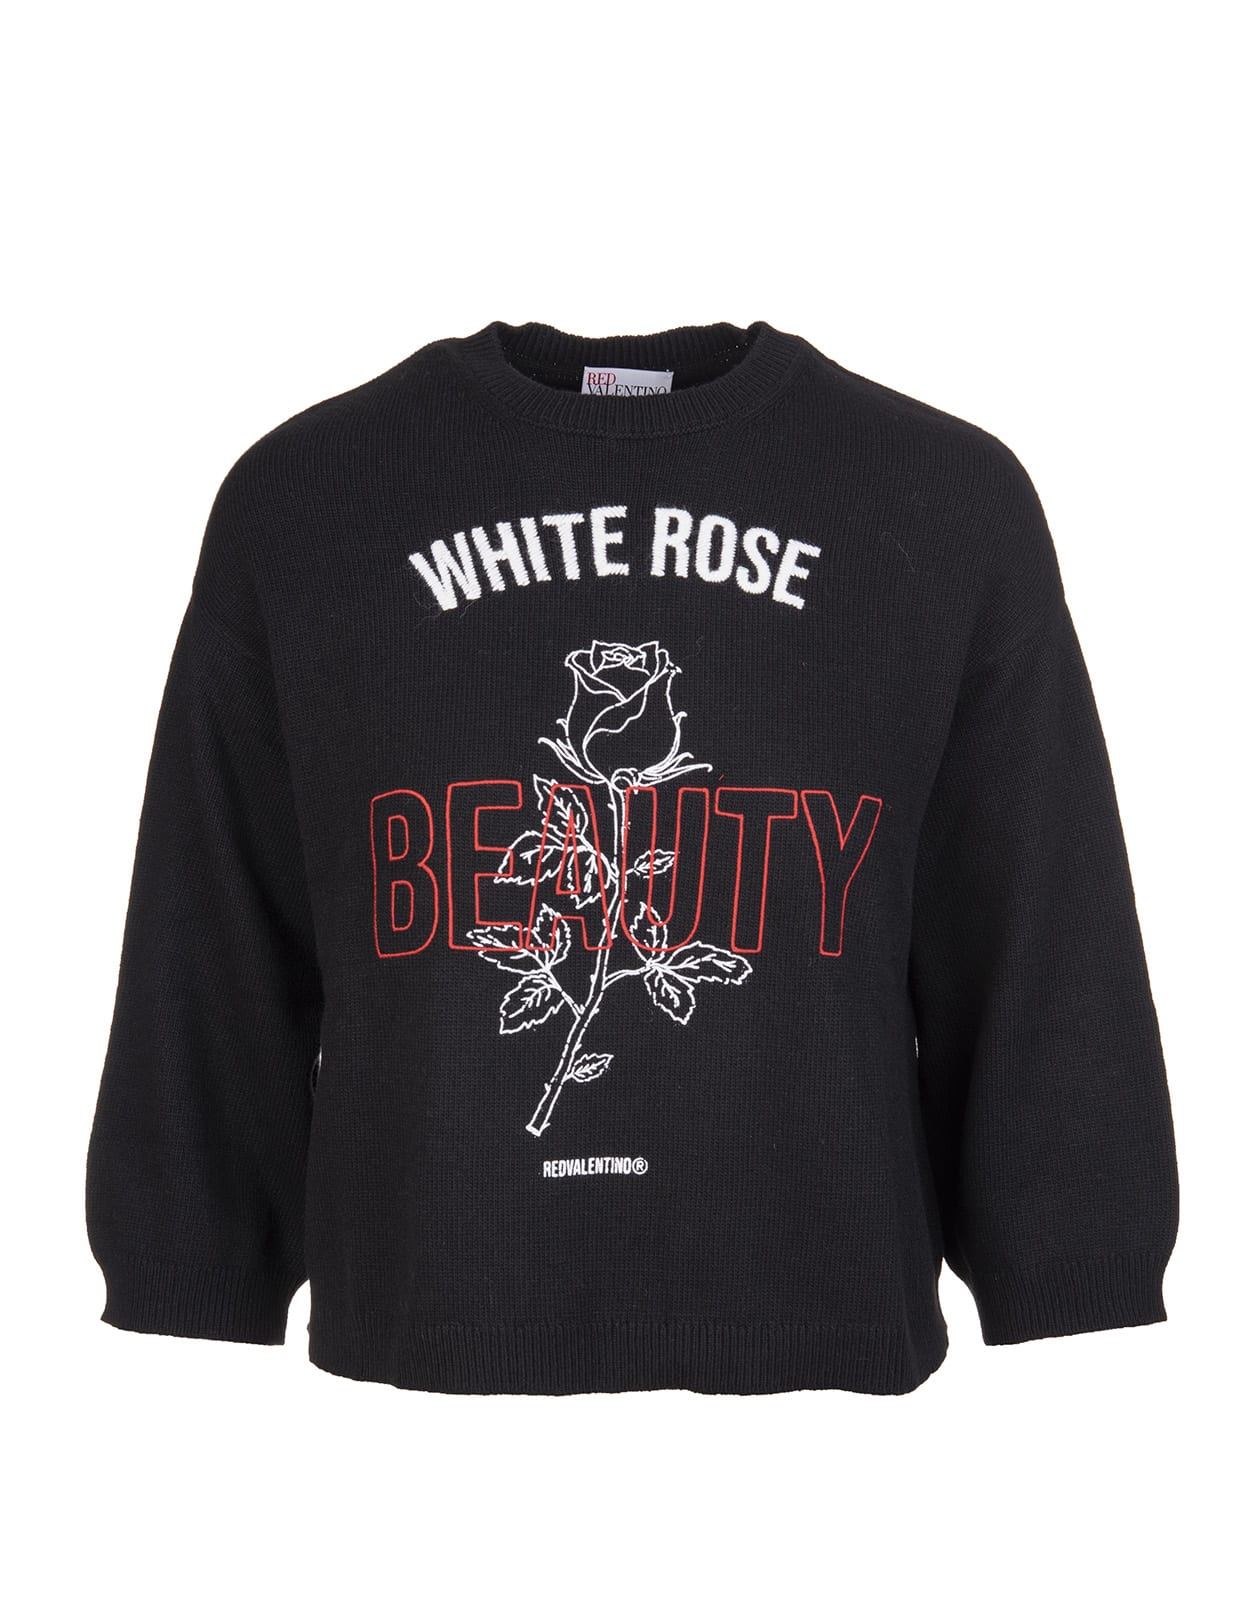 RED Valentino Black Sweater In Wool Blend With Rose Embroidery